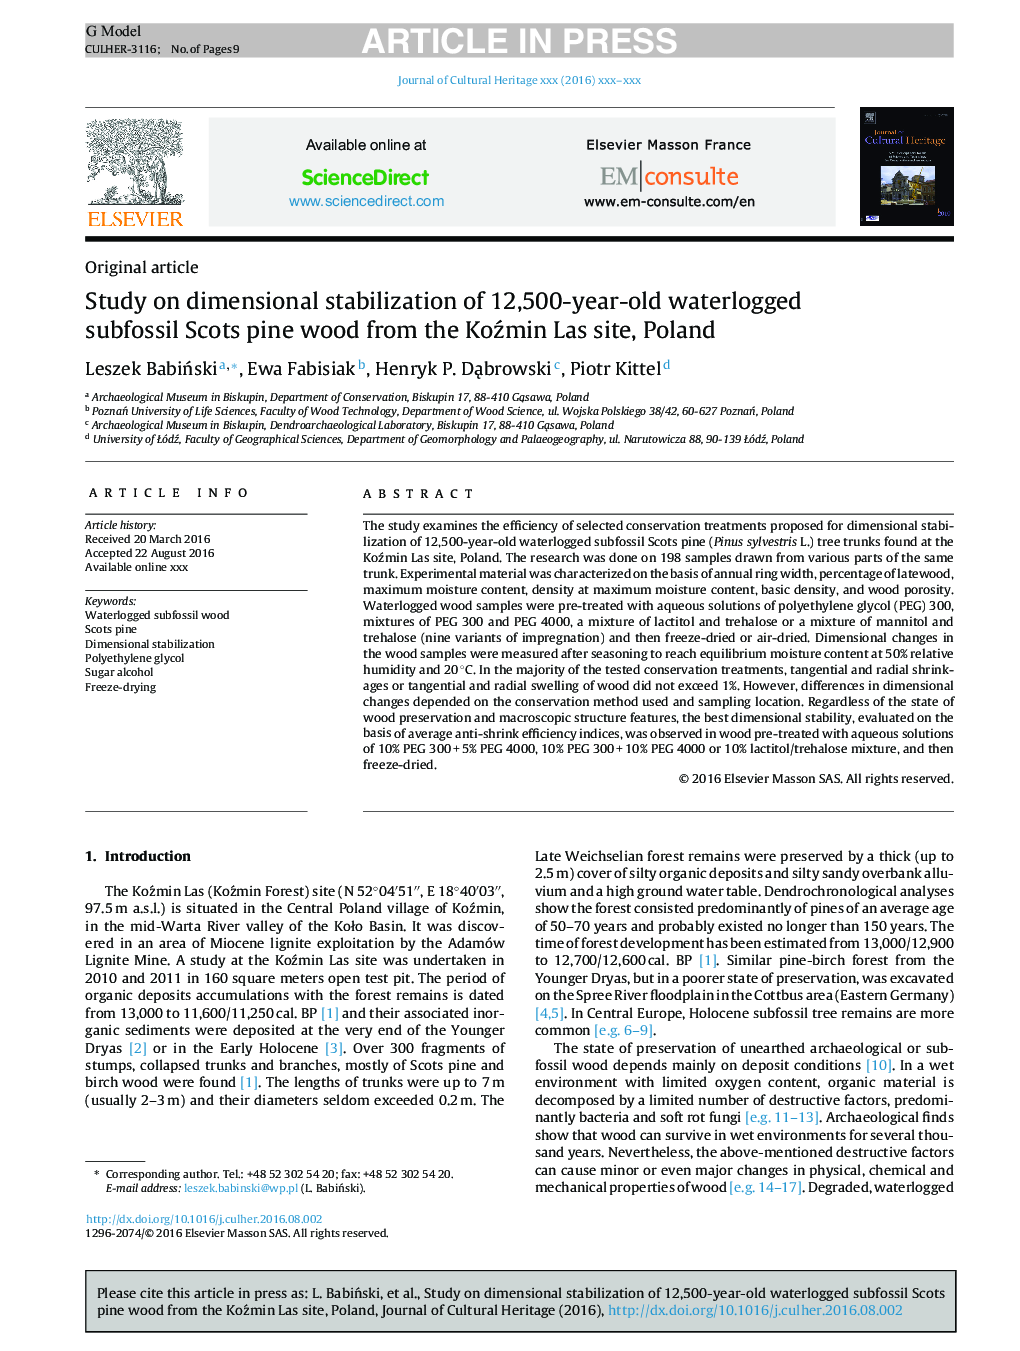 Study on dimensional stabilization of 12,500-year-old waterlogged subfossil Scots pine wood from the KoÅºmin Las site, Poland